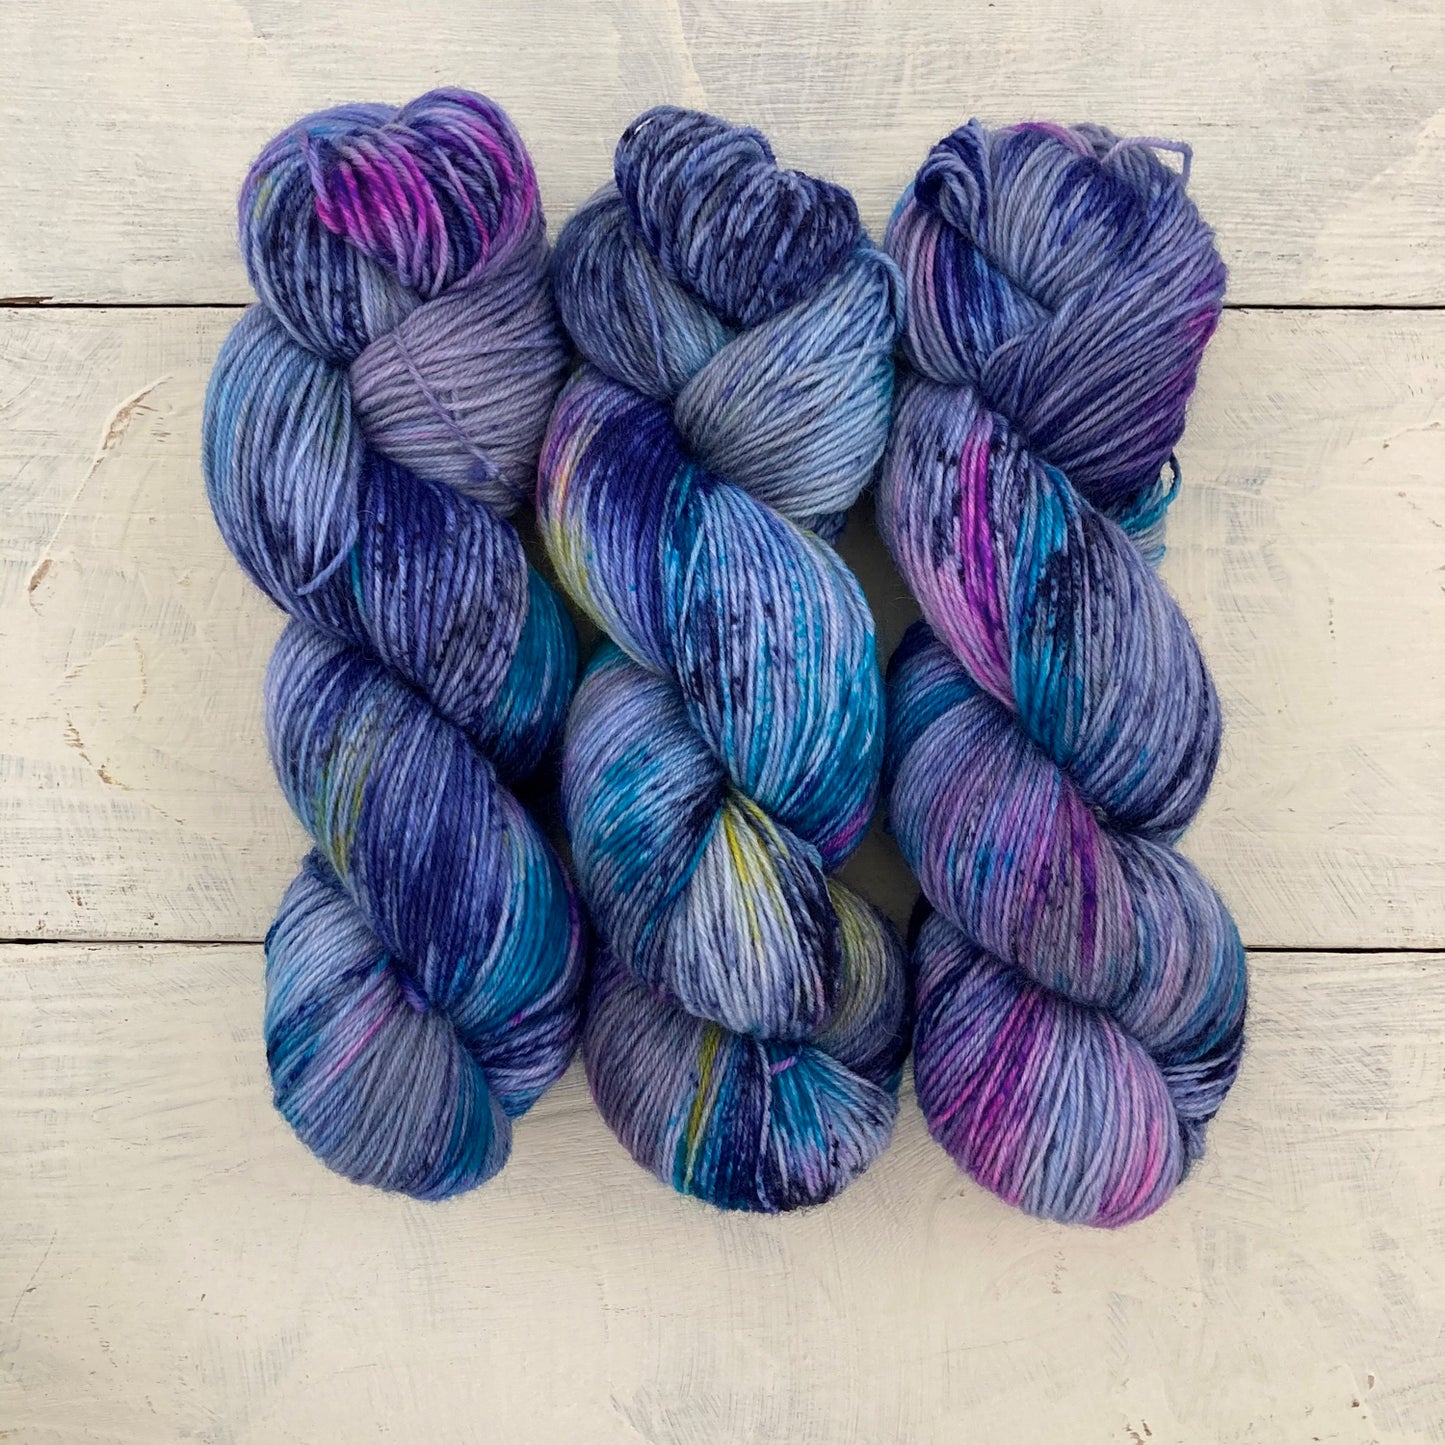 Hand-dyed yarn No.142 sock yarn "Belle nuit, ô nuit d'amour"